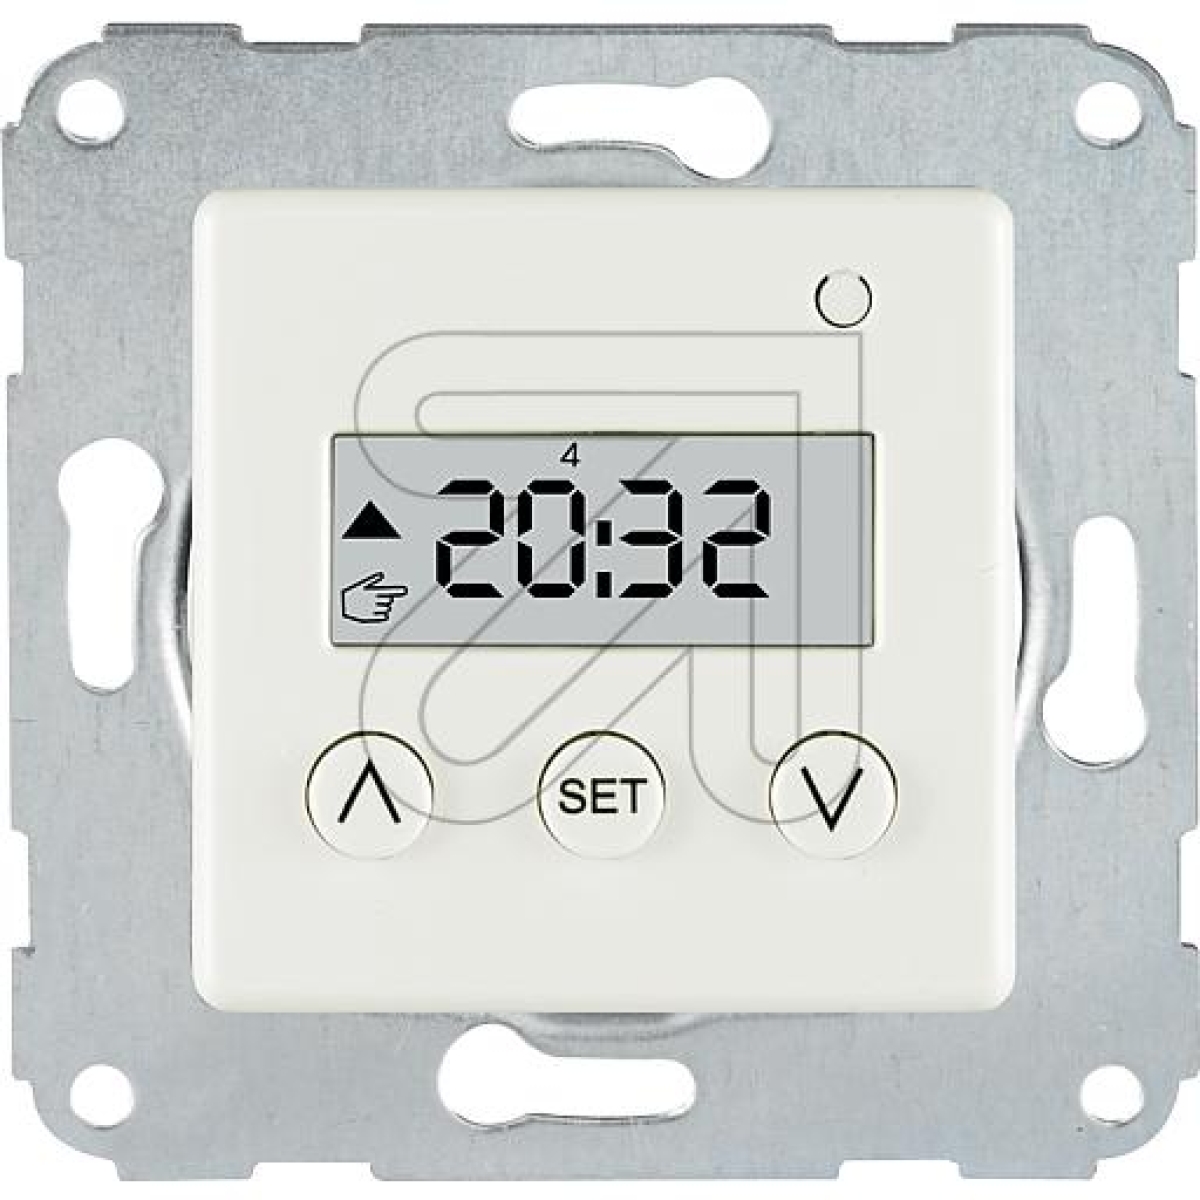 EGBblinds time switch S 50 WArticle-No: 121115